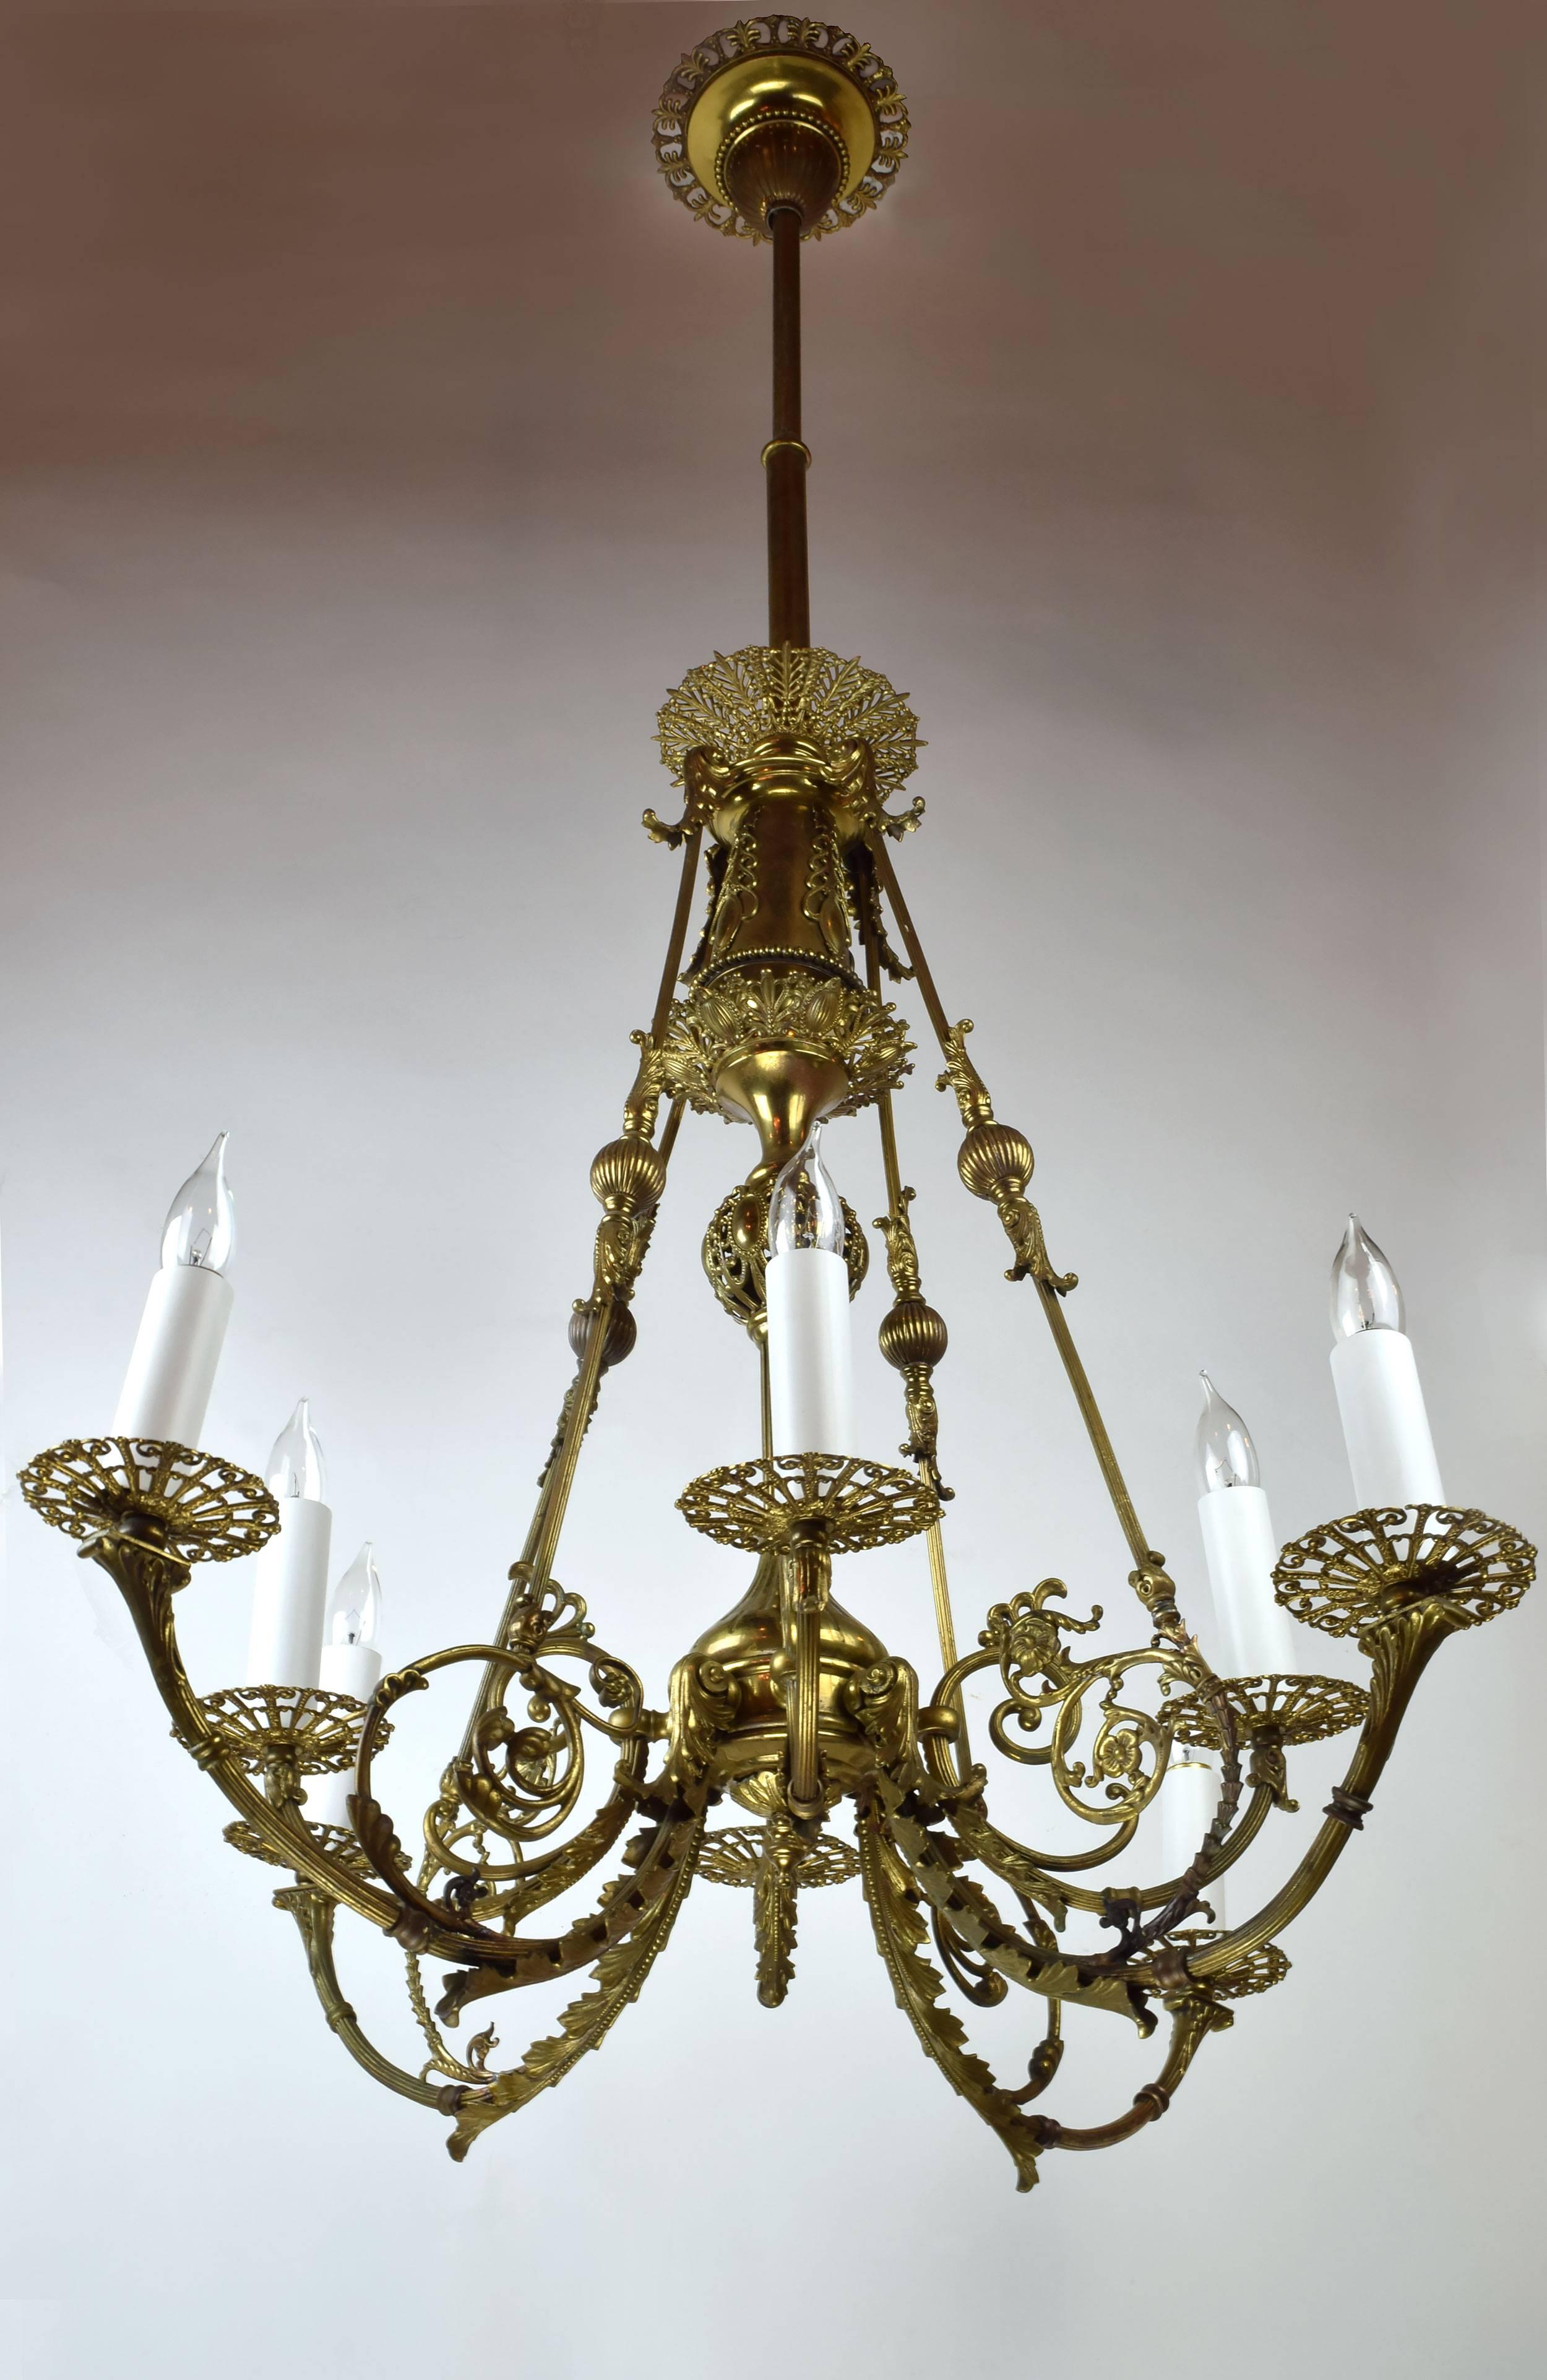 This incredible eight-arm brass chandelier impresses with its ornate organic ornamentation and detailed flourishes. From the canopy down to the candleholders, no surface has gone unadorned, and you may find your eye wandering upwards, drawn to the